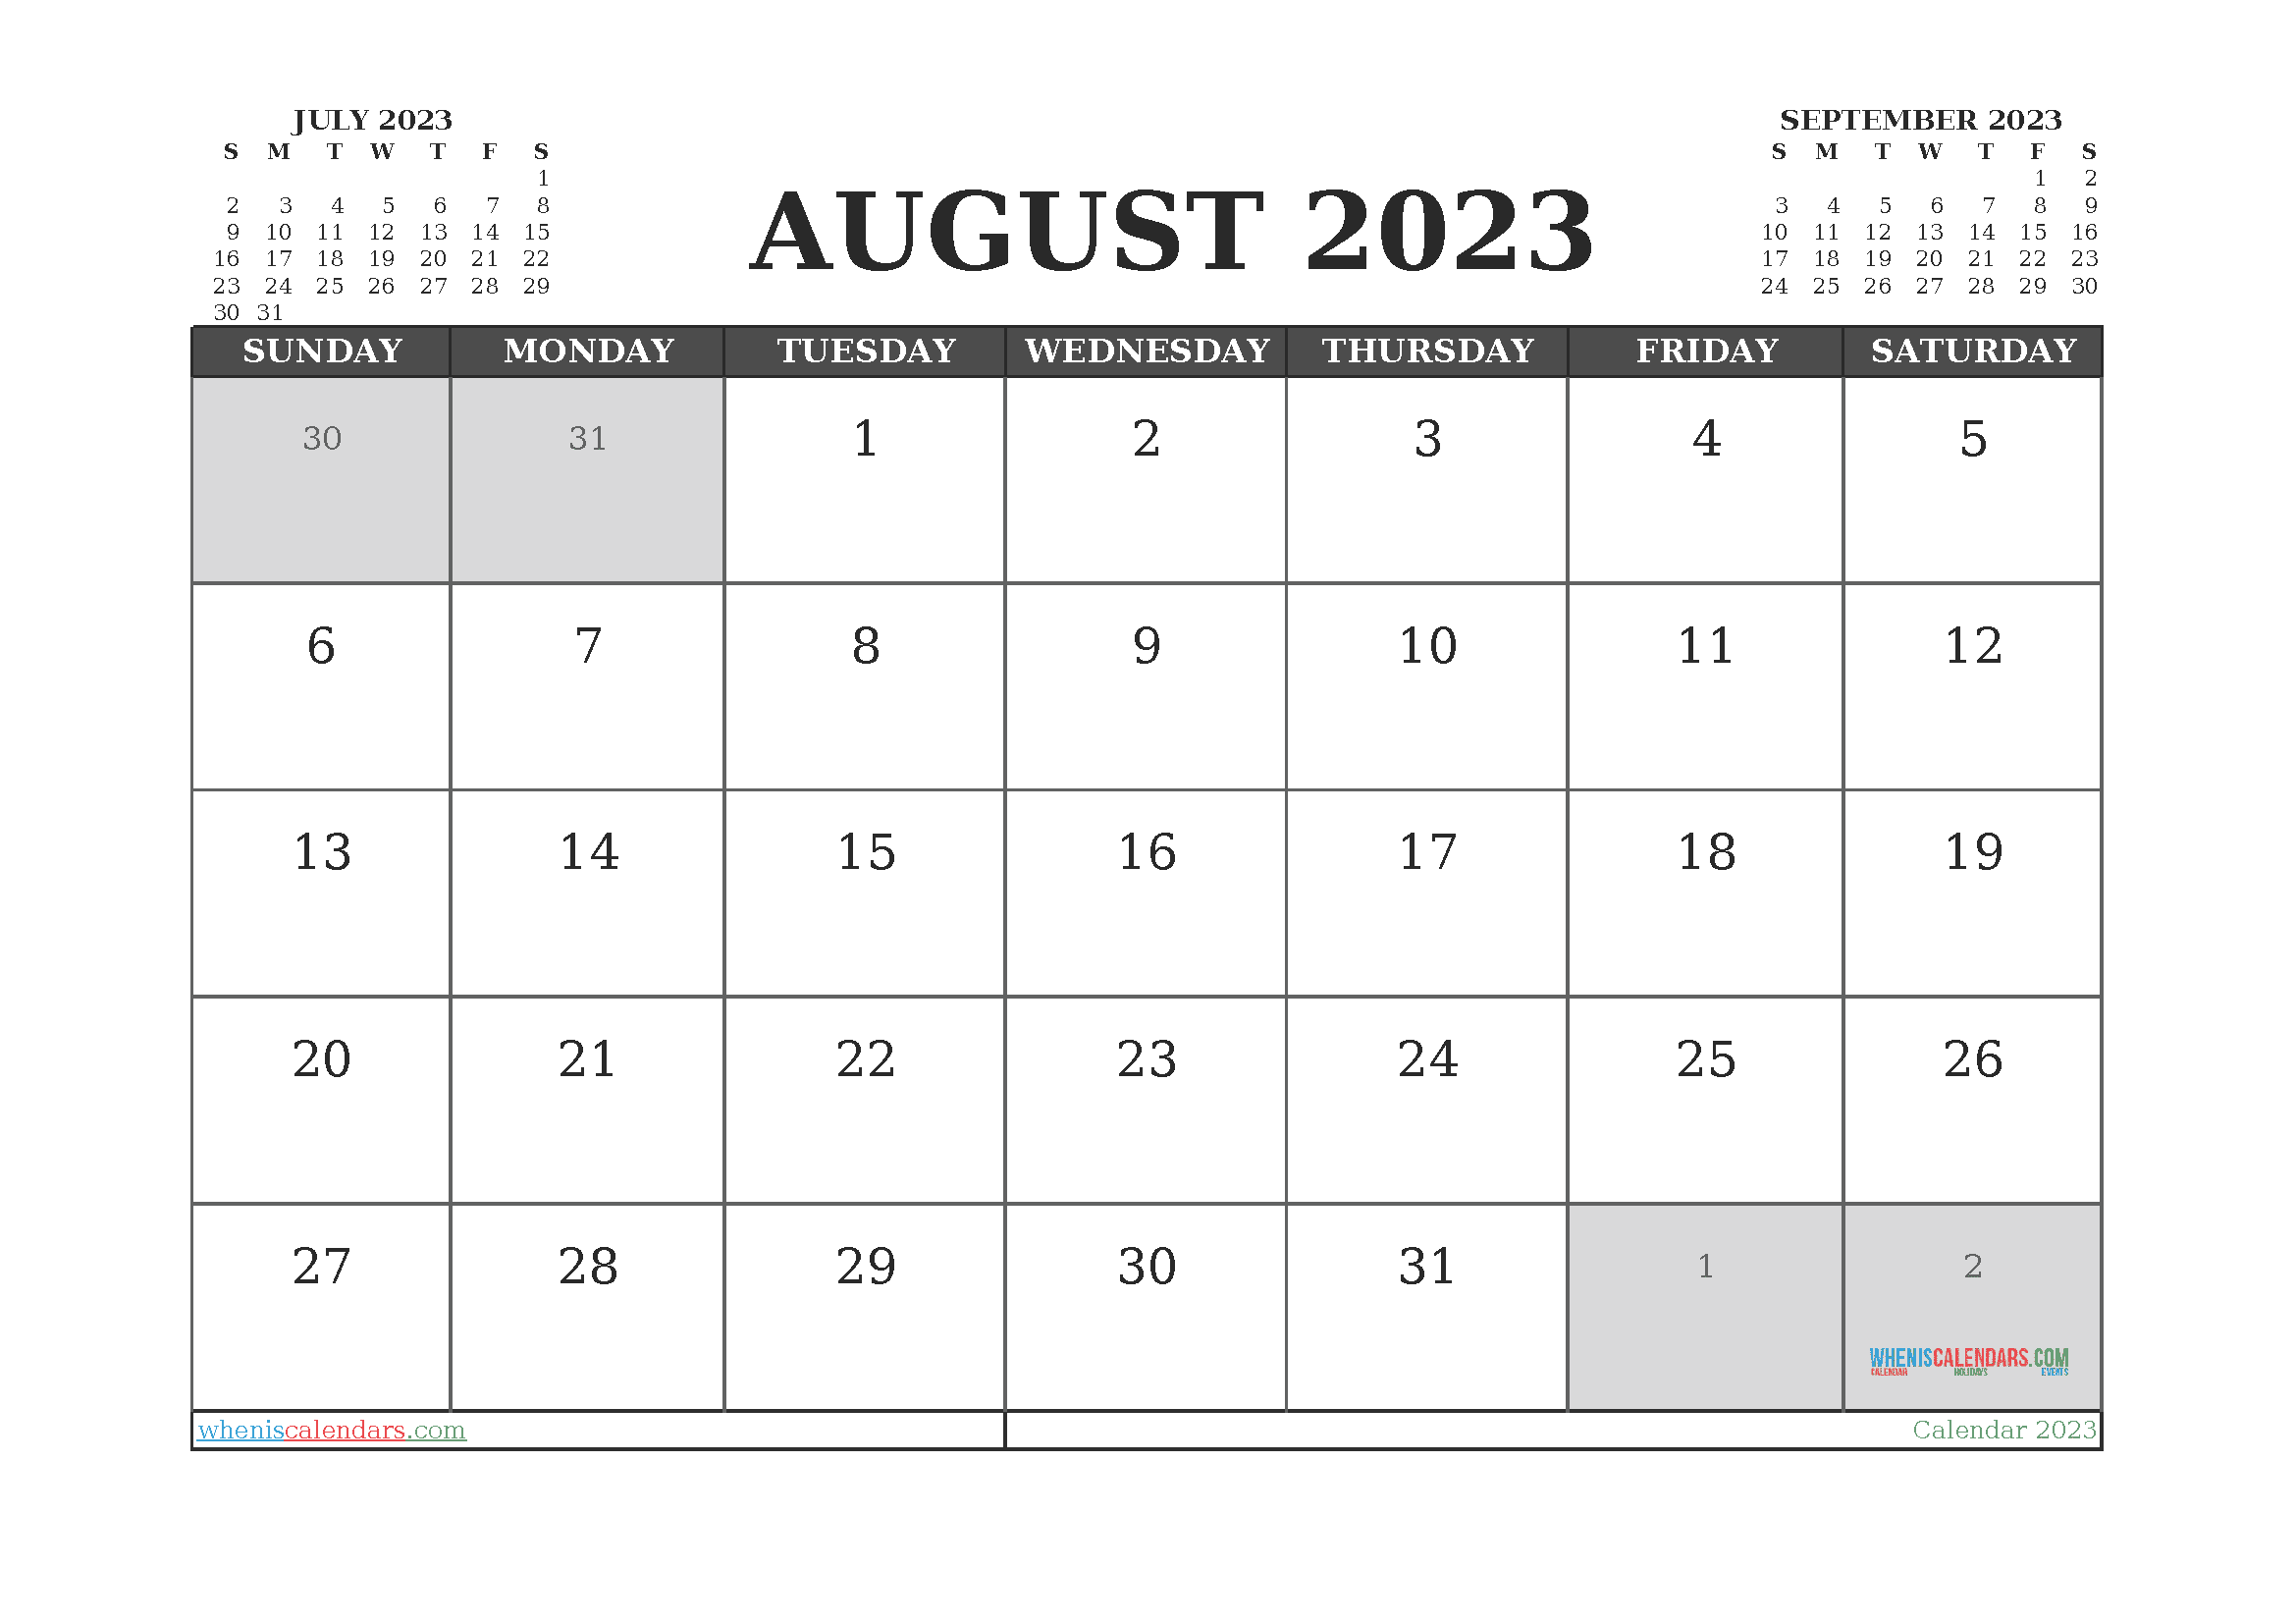 August 2023 Calendar with Holidays Free Printable PDF in Landscape